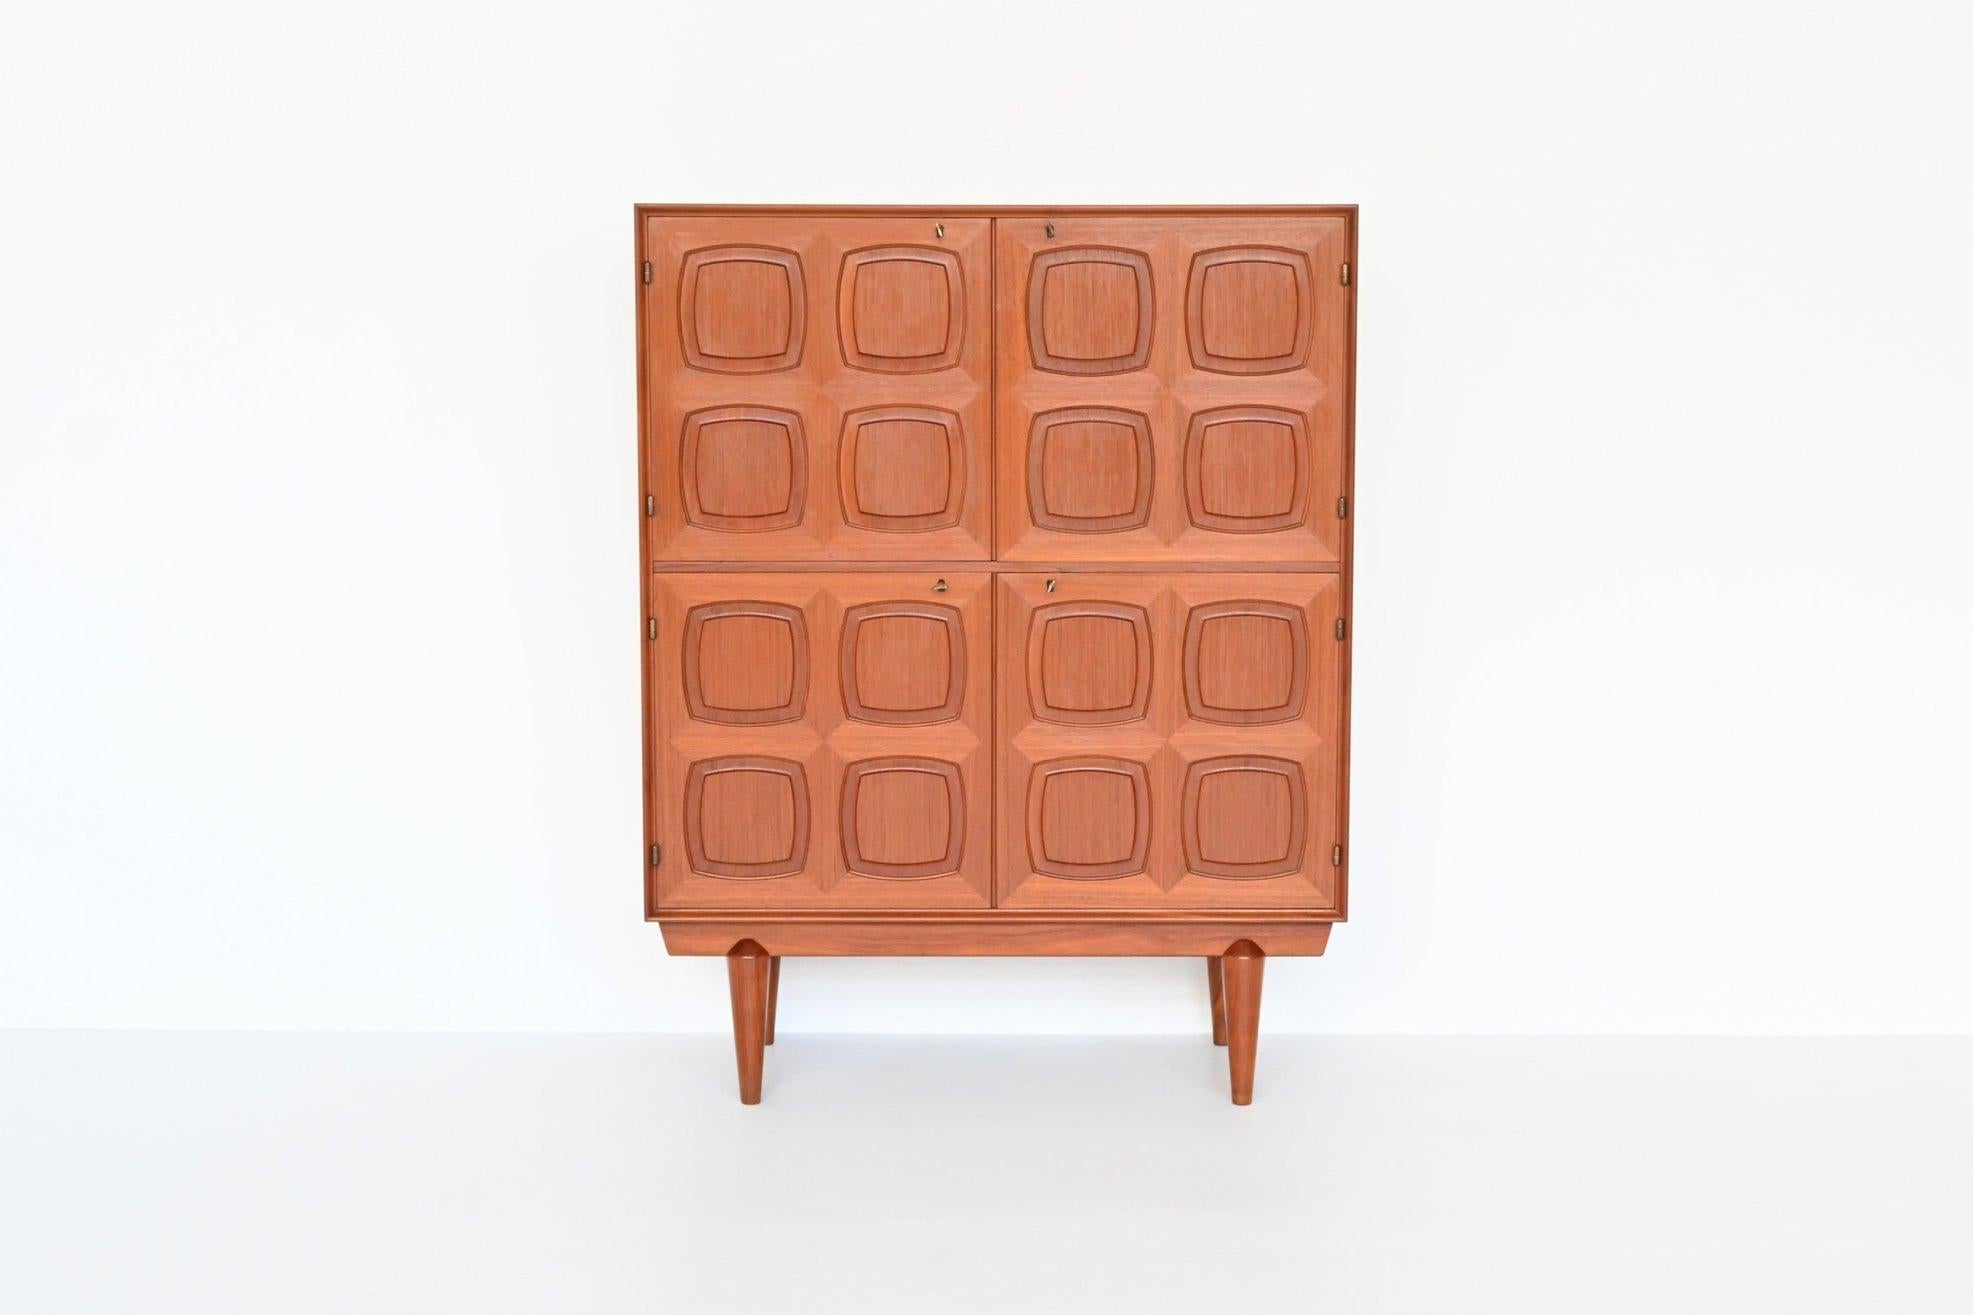 Beautiful and very rare high cabinet designed by Rolf Rastad & Adolf Relling for Gustav Bahus, Norway 1960. This high quality Scandinavian cabinet is executed in teak wood supported by a solid frame. It has four massive doors with a very nice